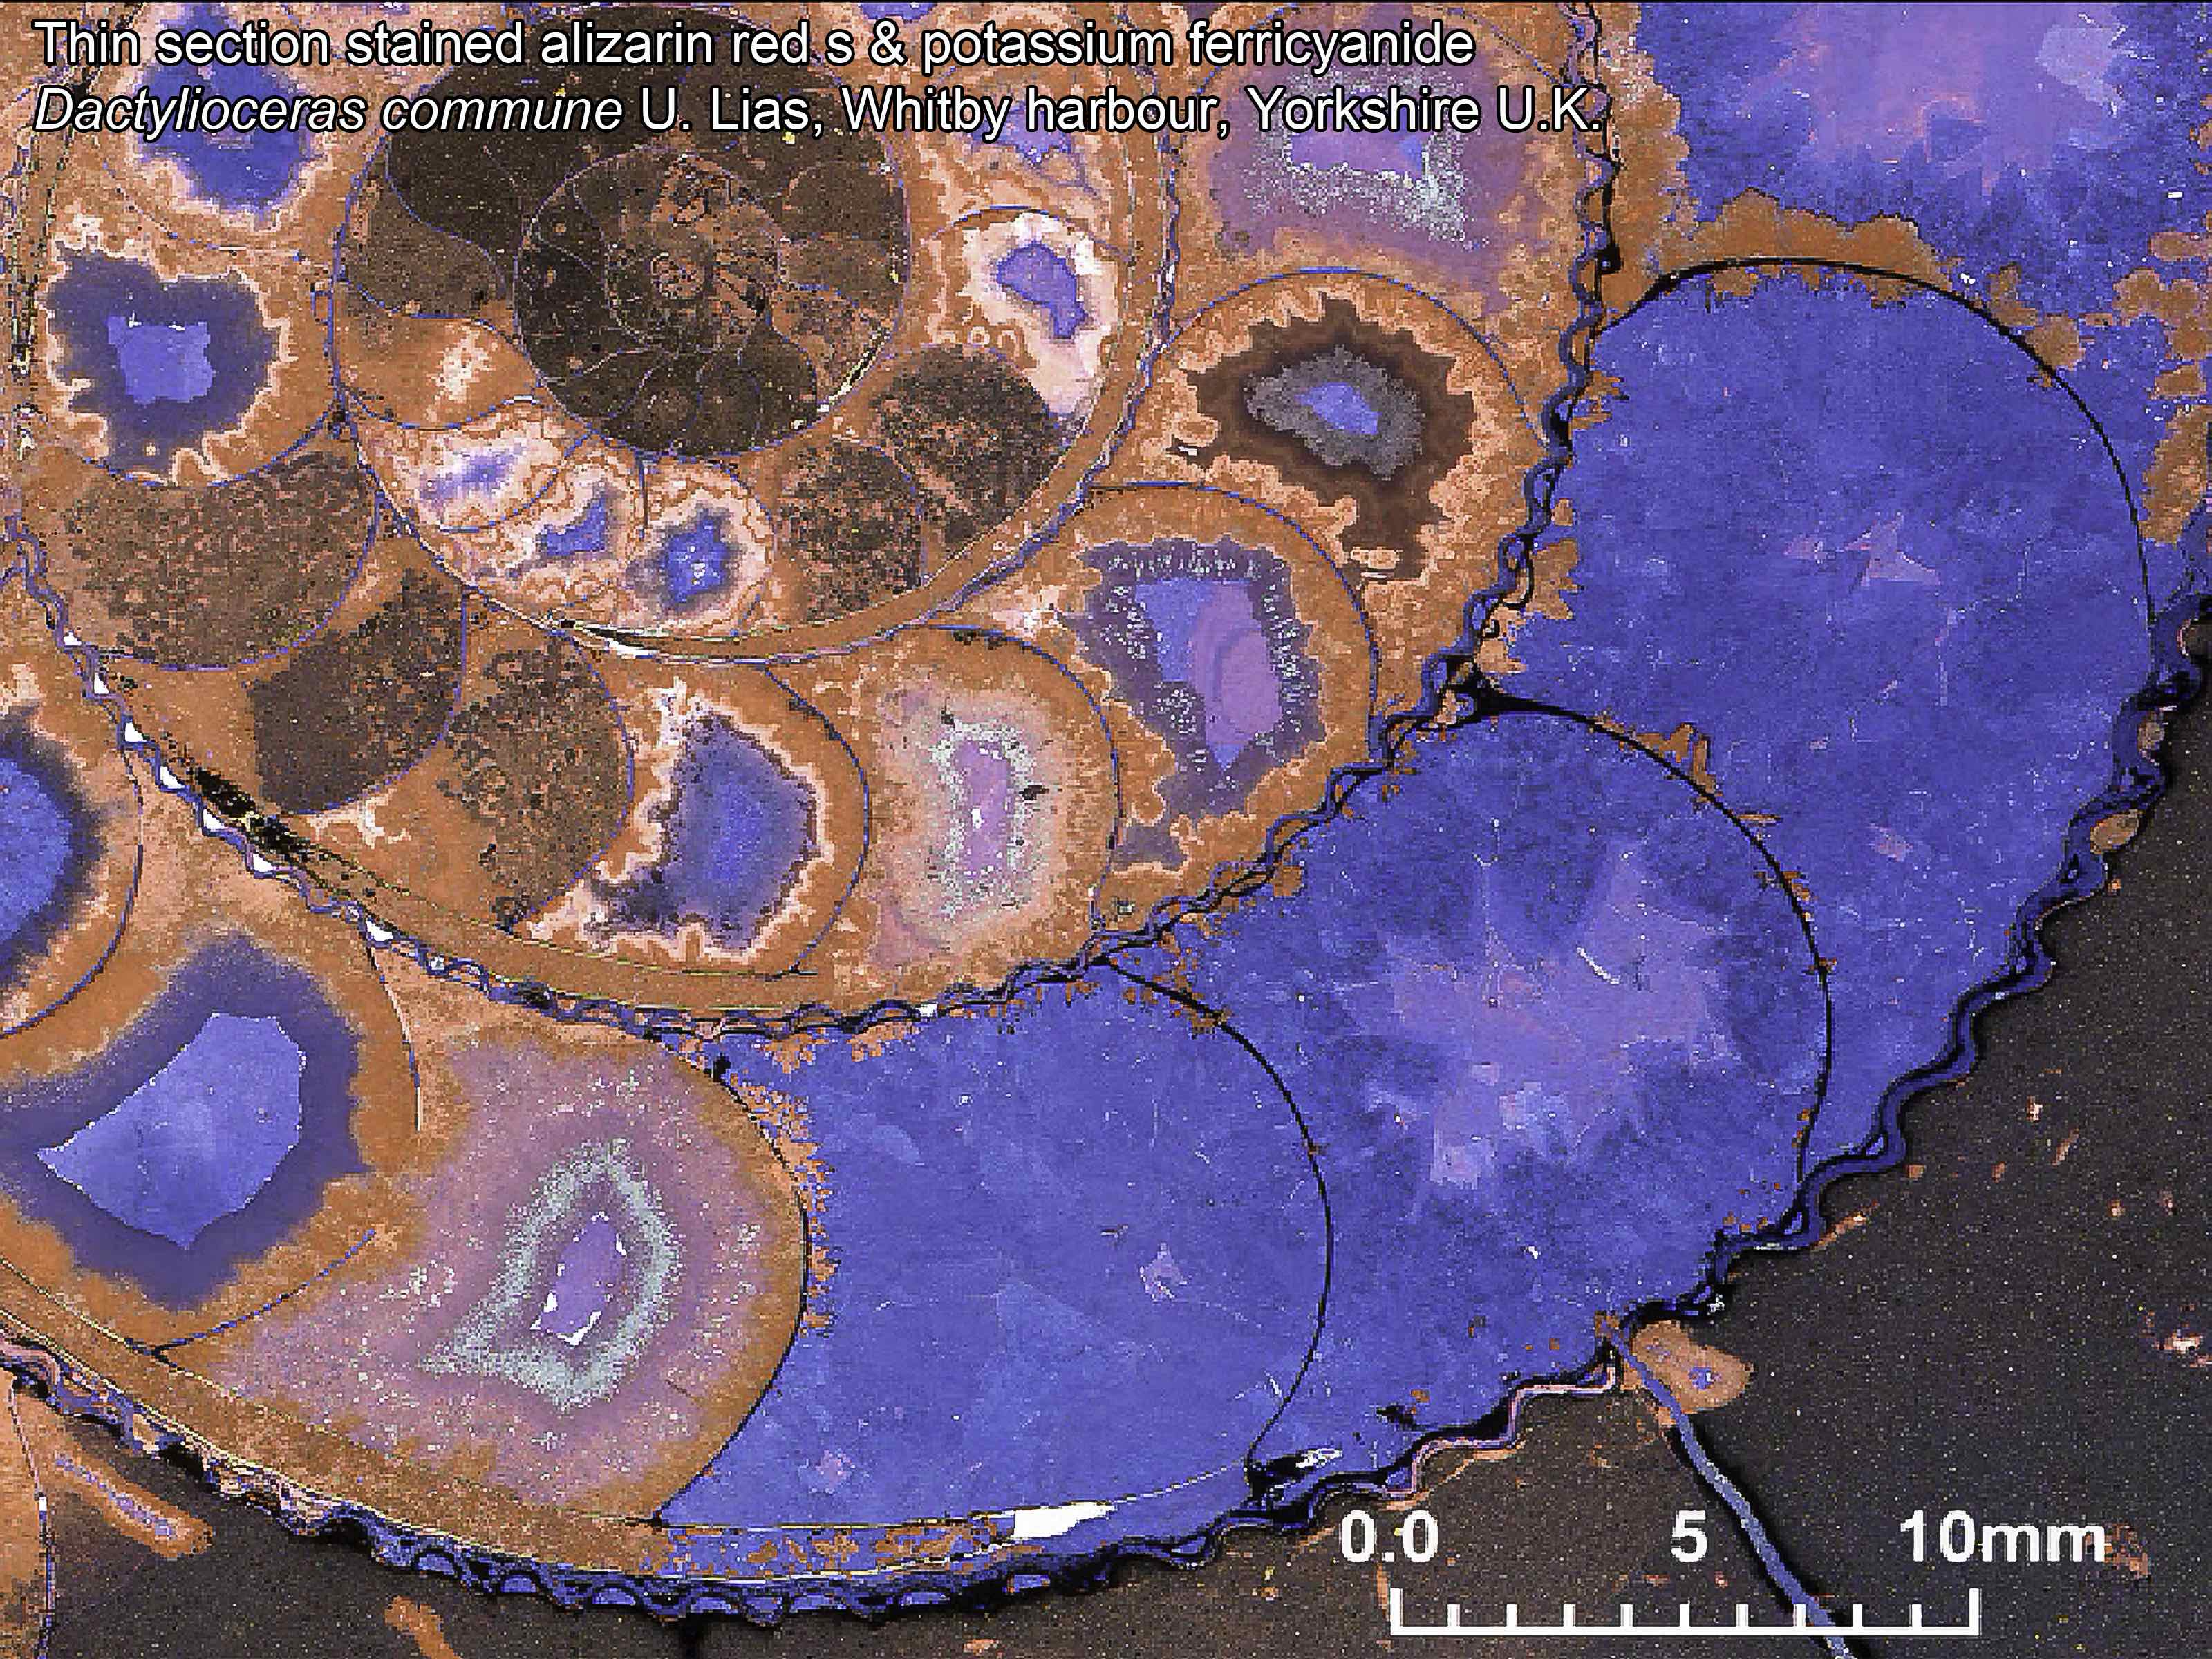 Stained thin section showing variation in the fill of an ammonite’s camerae; brown - lime mud ,red - non-ferroan calcite, and mauve, purple and blue ferroan calcite with varying amounts of ferrous iron present.